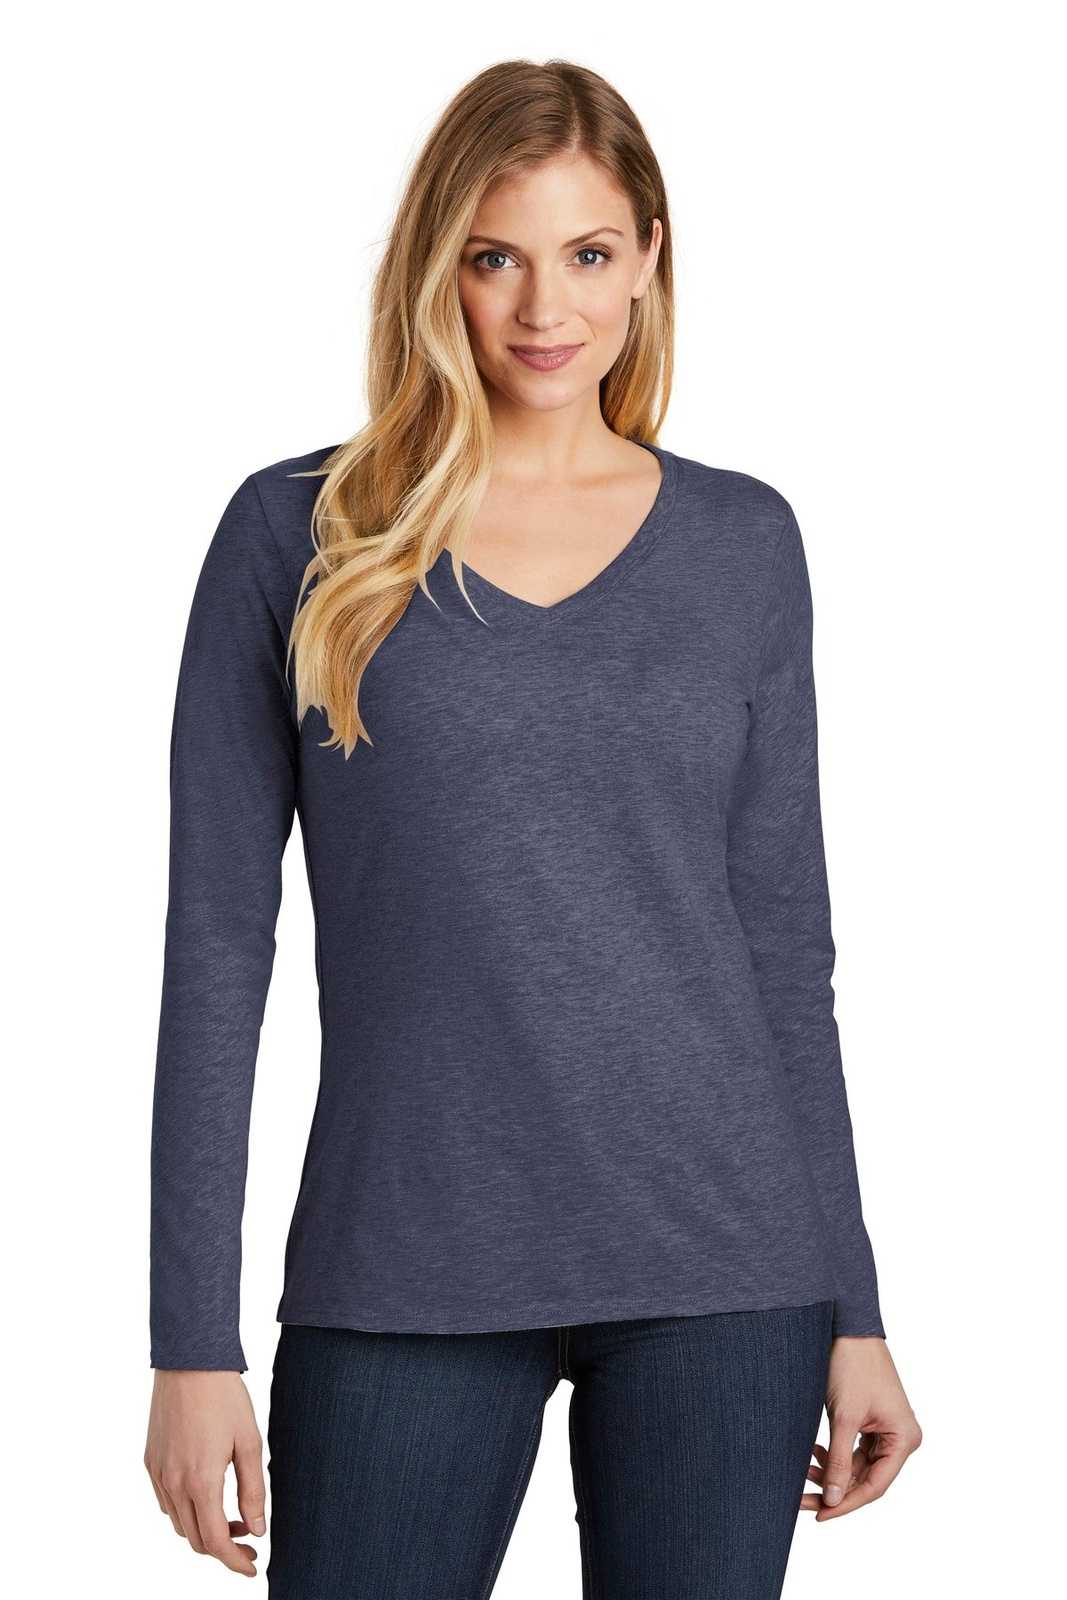 District DT6201 Women's Very Important Tee Long Sleeve V-Neck - Heathered Navy - HIT a Double - 1